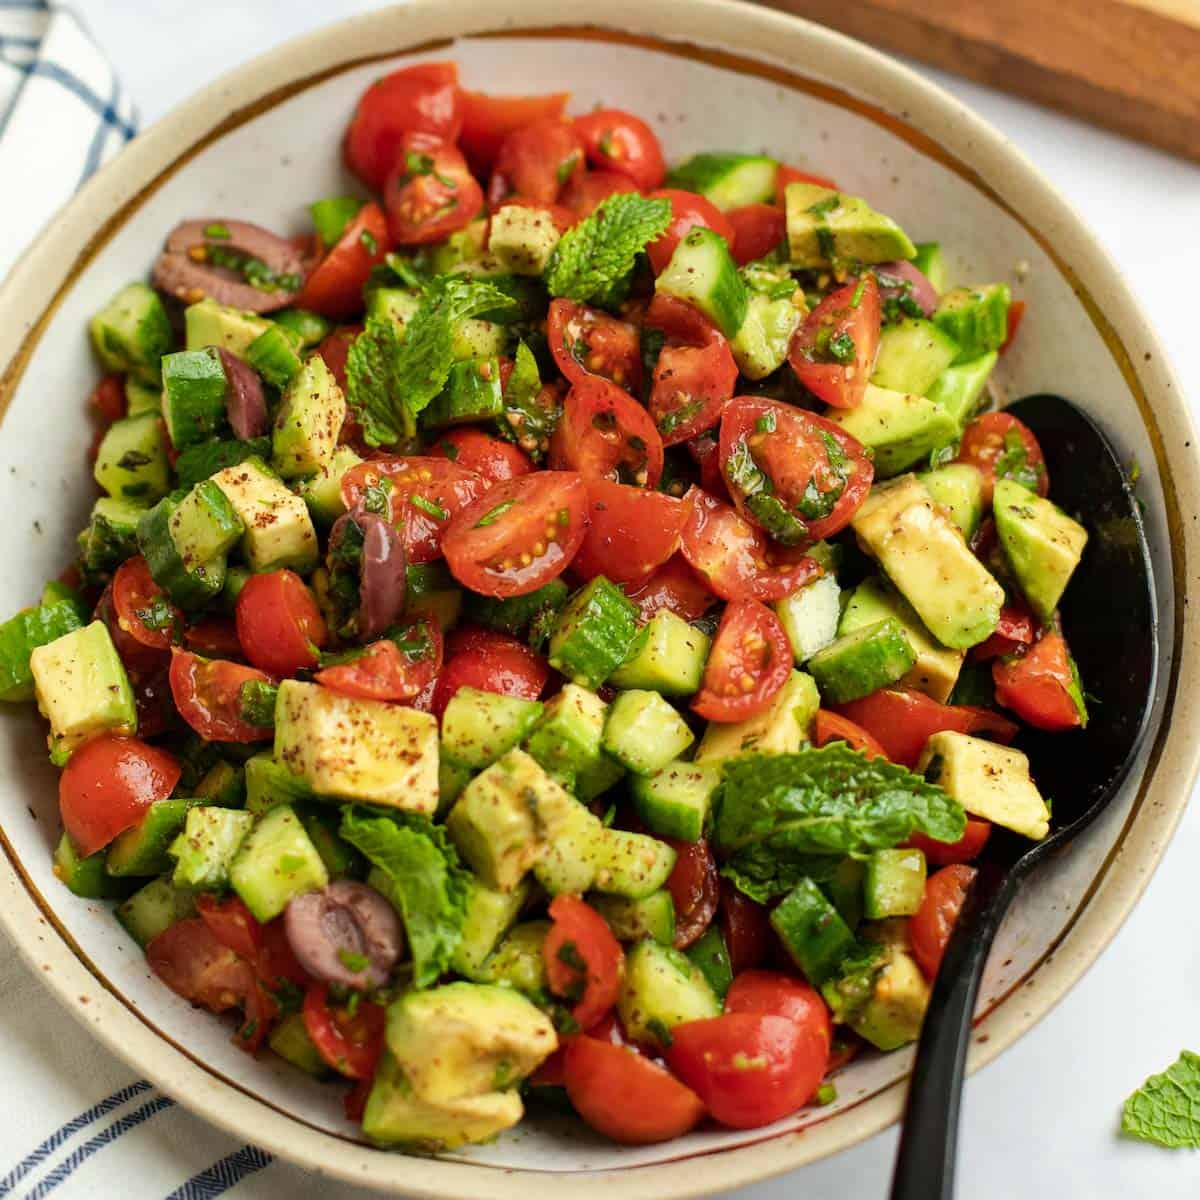 Colorful Israeli salad with tomatoes, cucumbers, avocado, and fresh herbs.